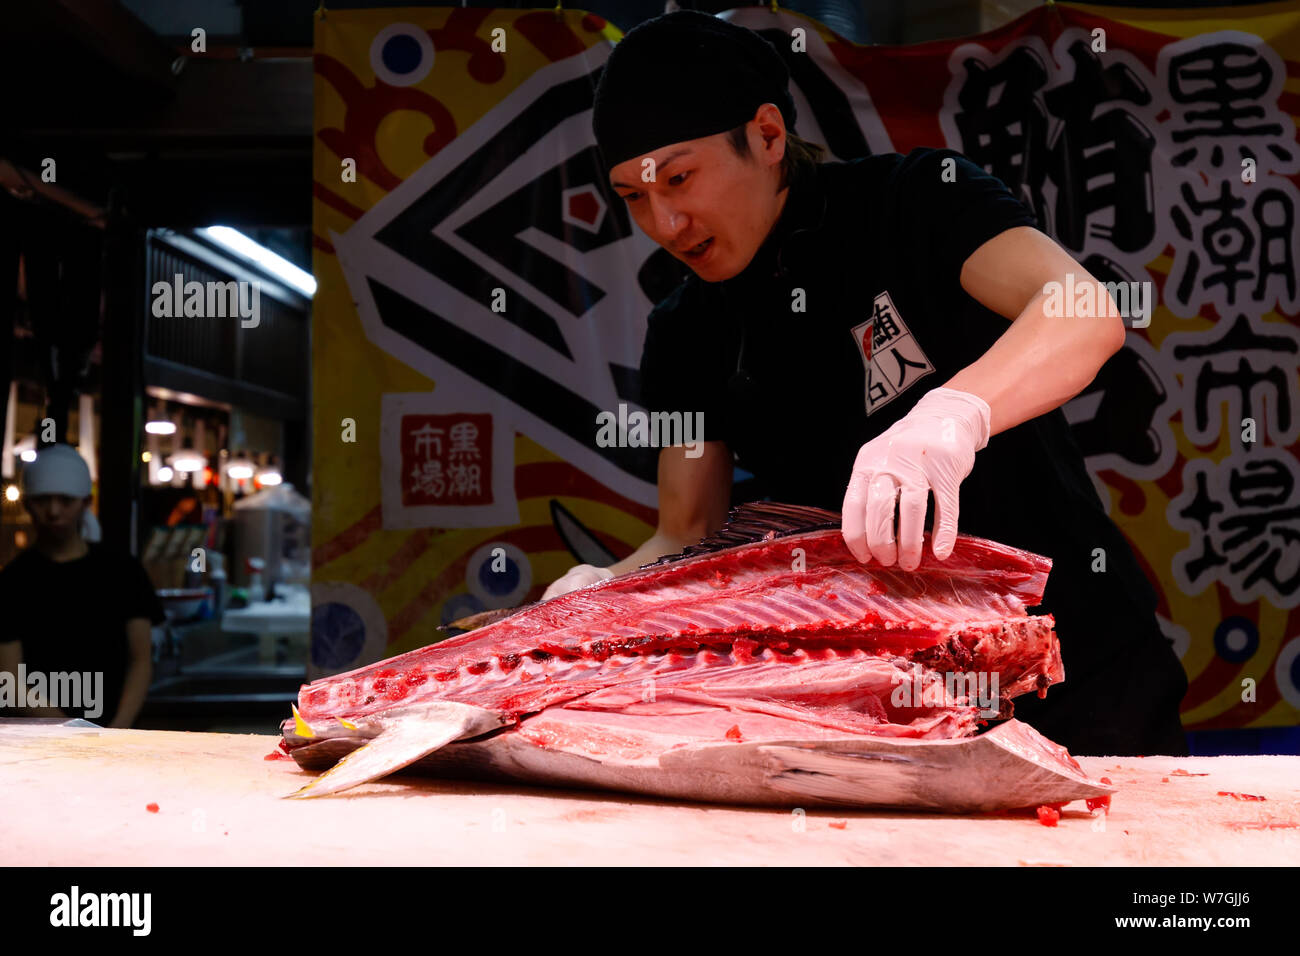 WAKAYAMA, JAPAN, MARCH 28, 2019 : A chef is showing how to cut a giant tuna in the Kuroshio fish market Stock Photo